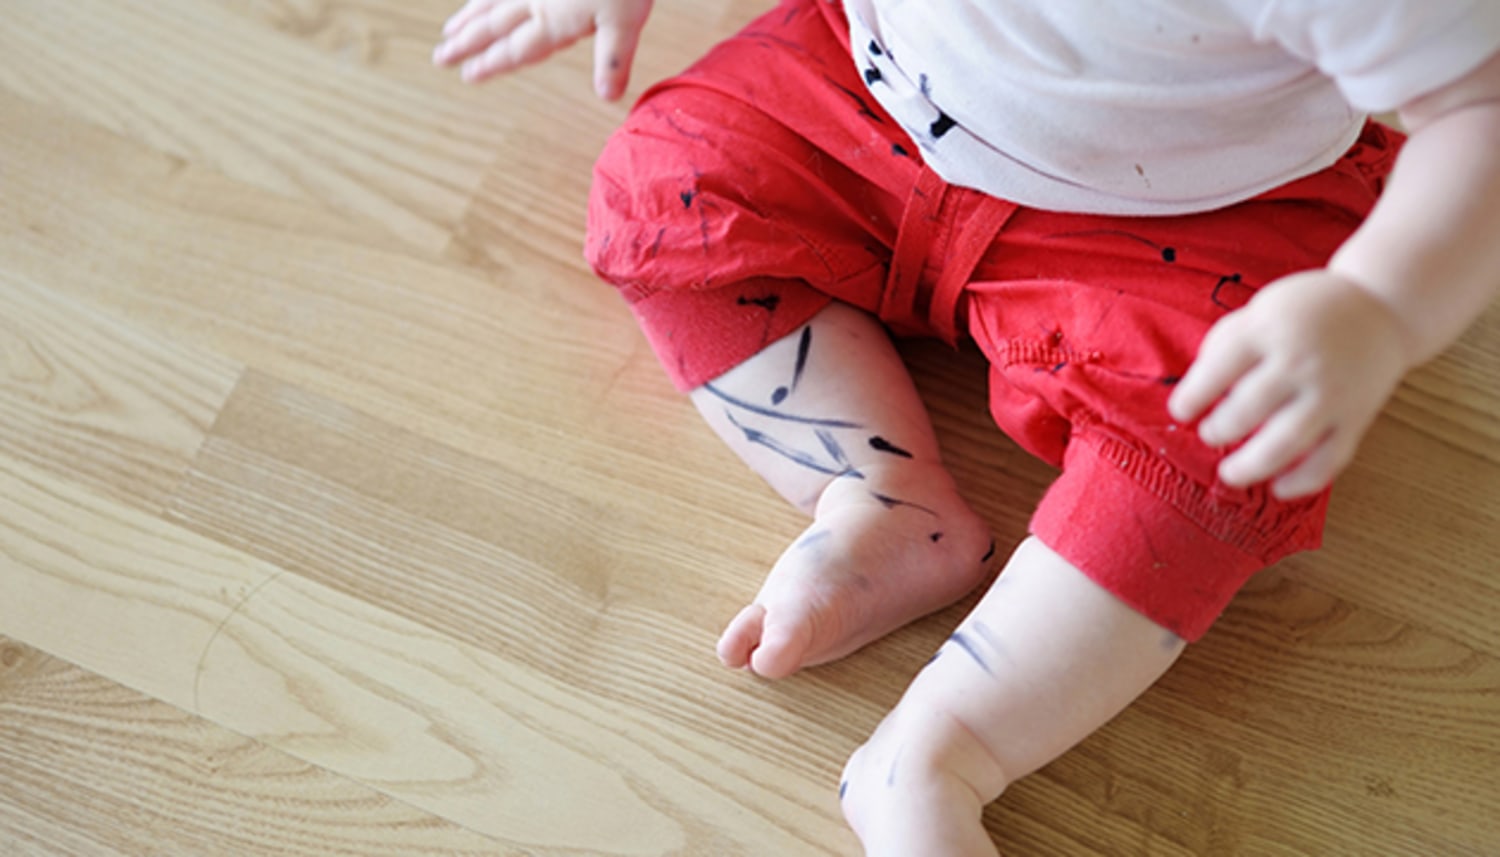 Remove Permanent Marker From Wood Furniture, How To Get Permanent Marker Off Hardwood Floor